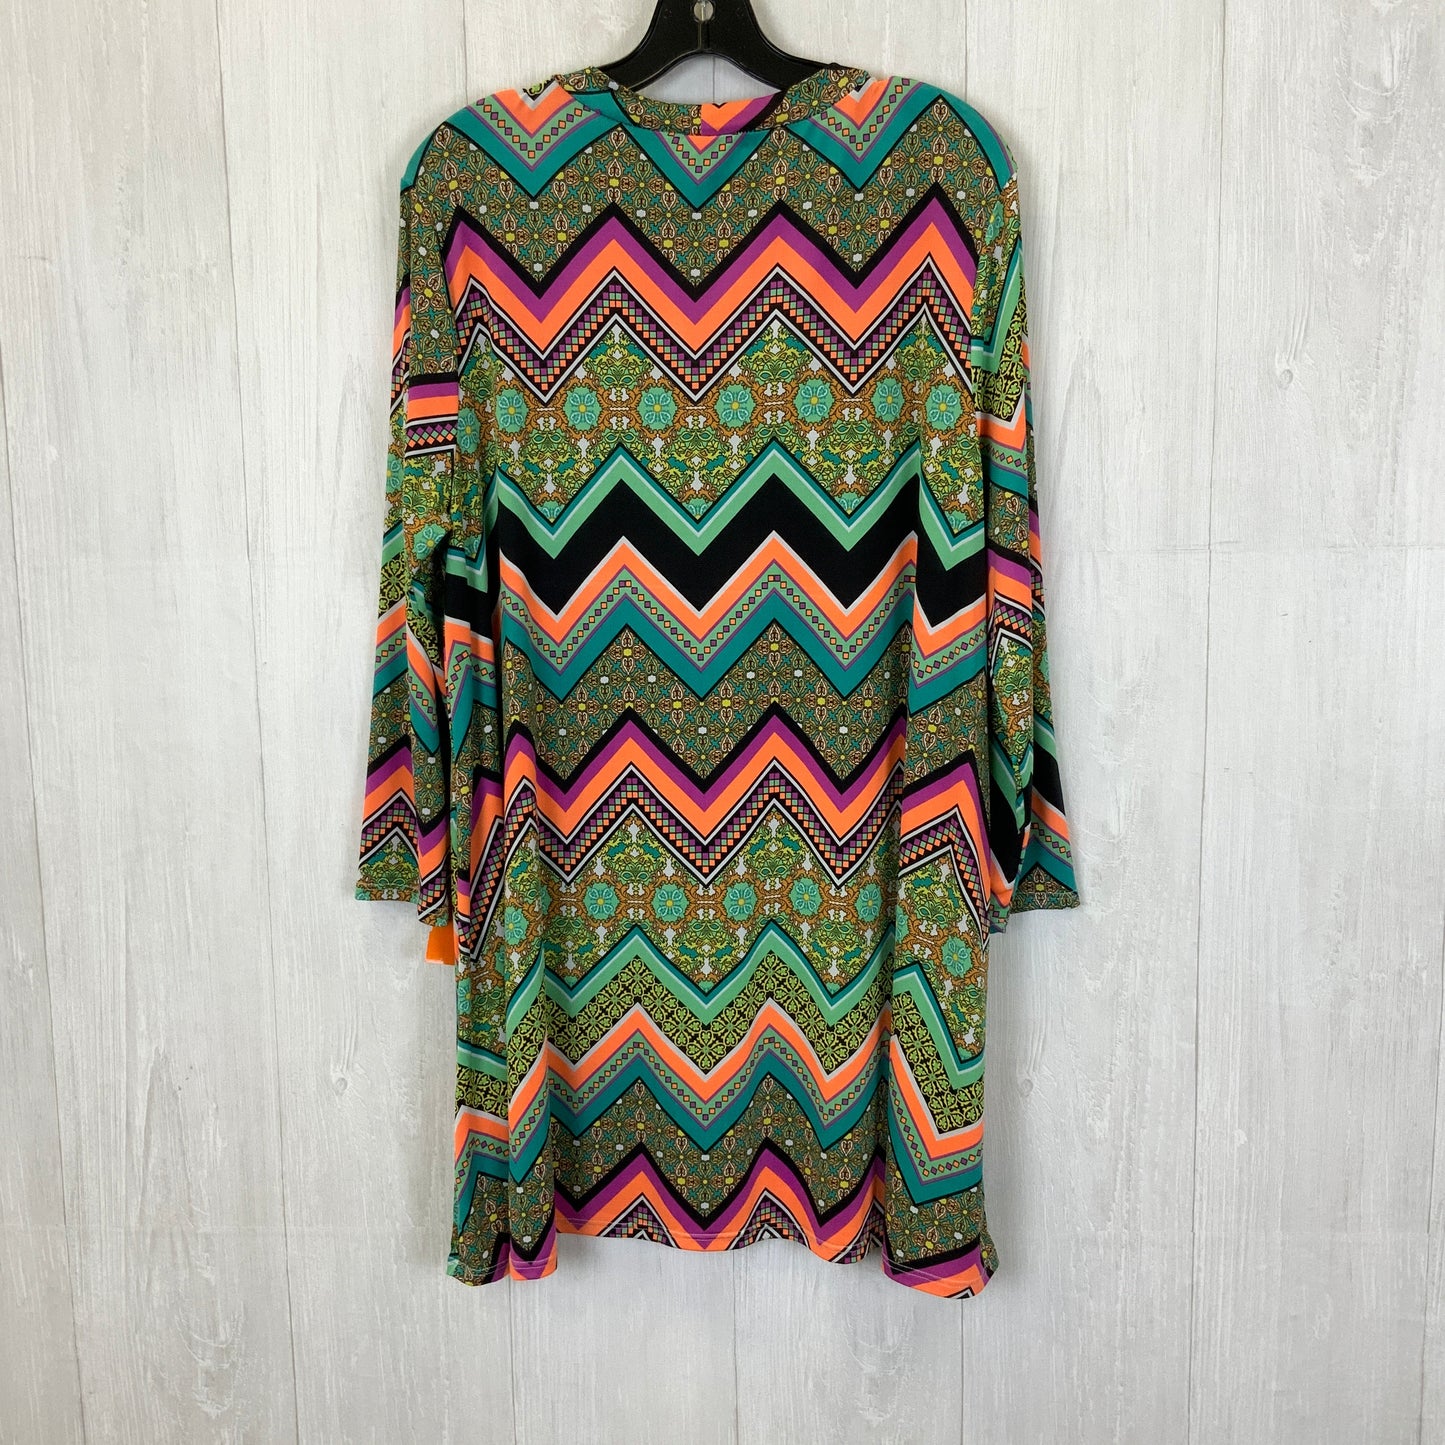 Multi-colored Top Long Sleeve Clothes Mentor, Size 2x